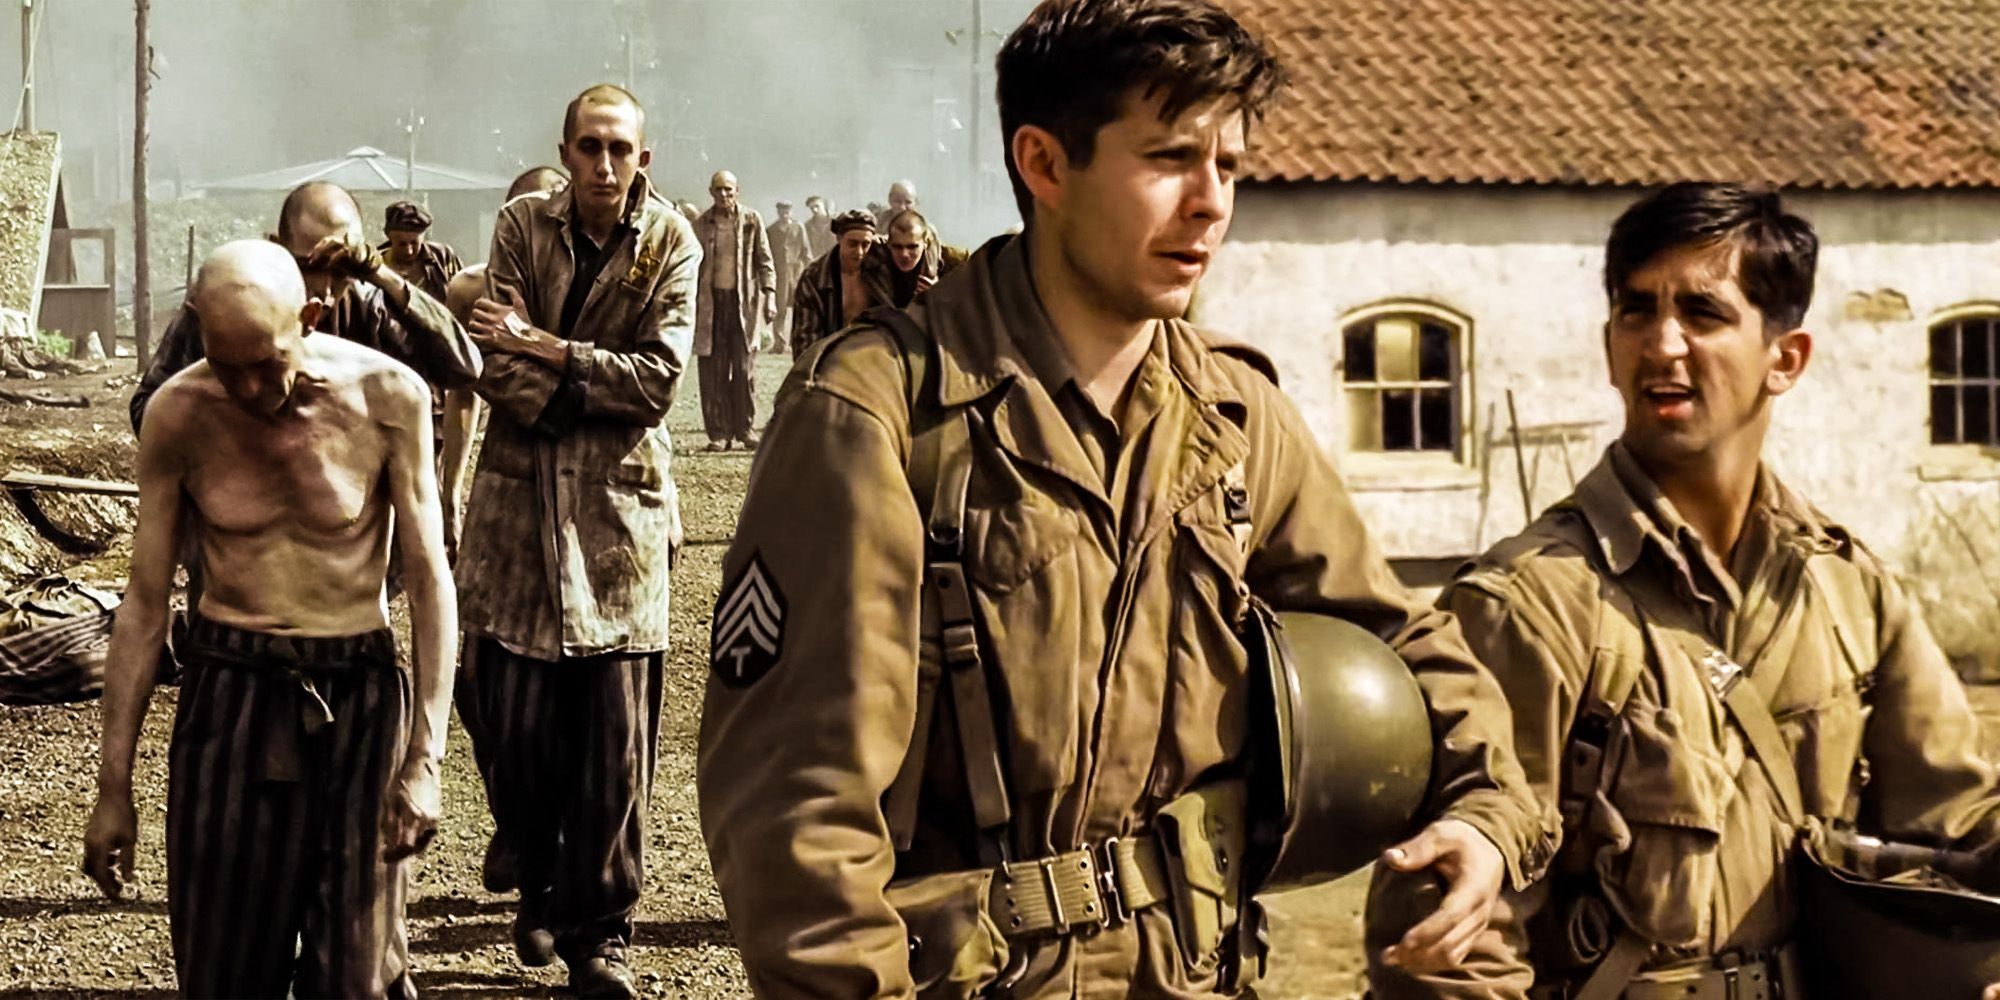 Band of brothers Really Liberate A Concentration Camp